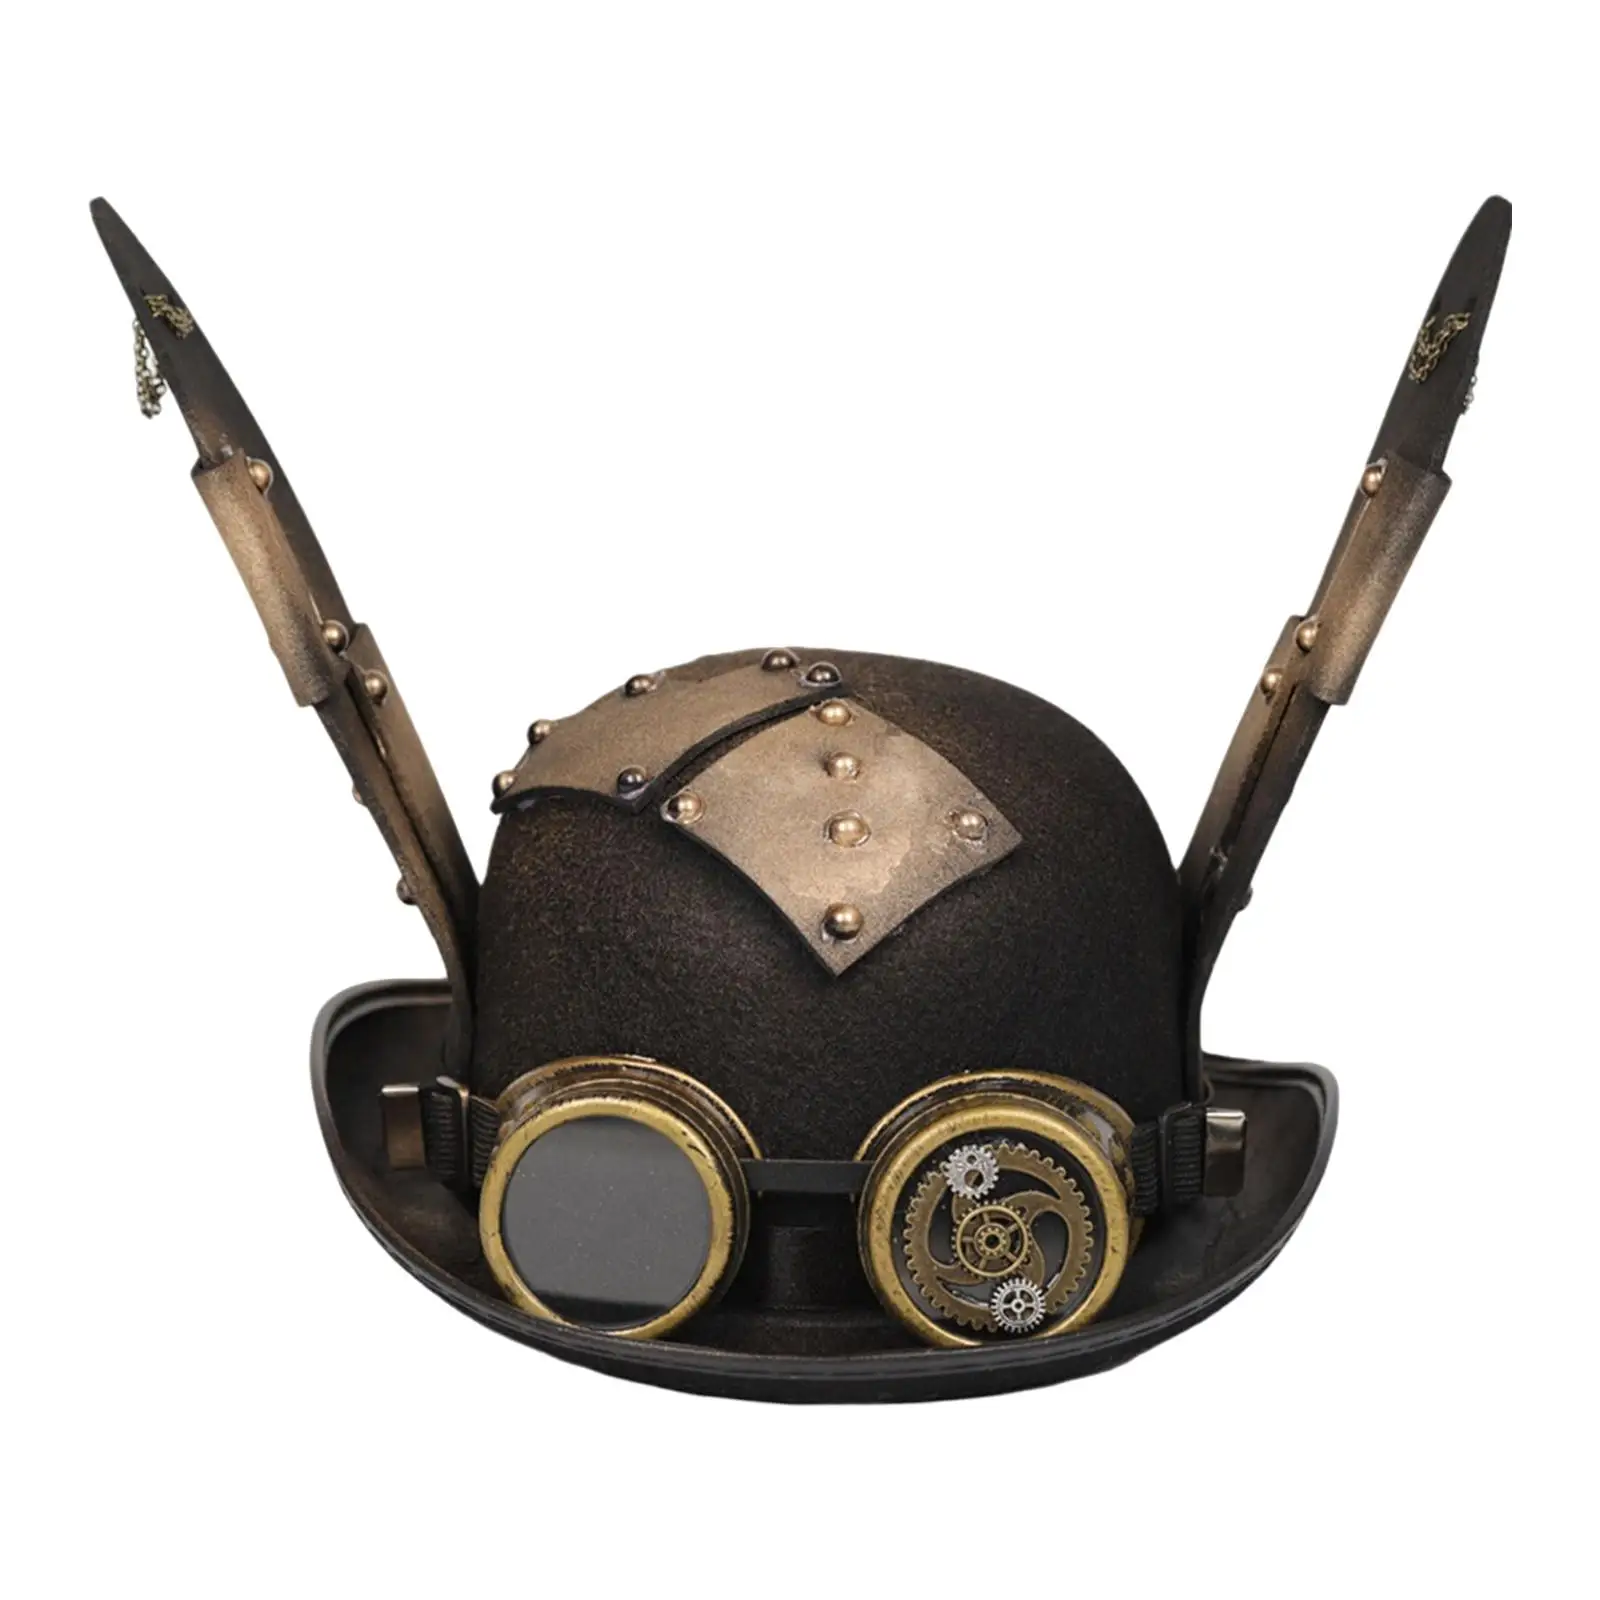 Halloween Steampunk Hat with Goggles Black Top Hat Masquerade Costume Party Detachable Goggle Retro Steampunk Goggles Glasses